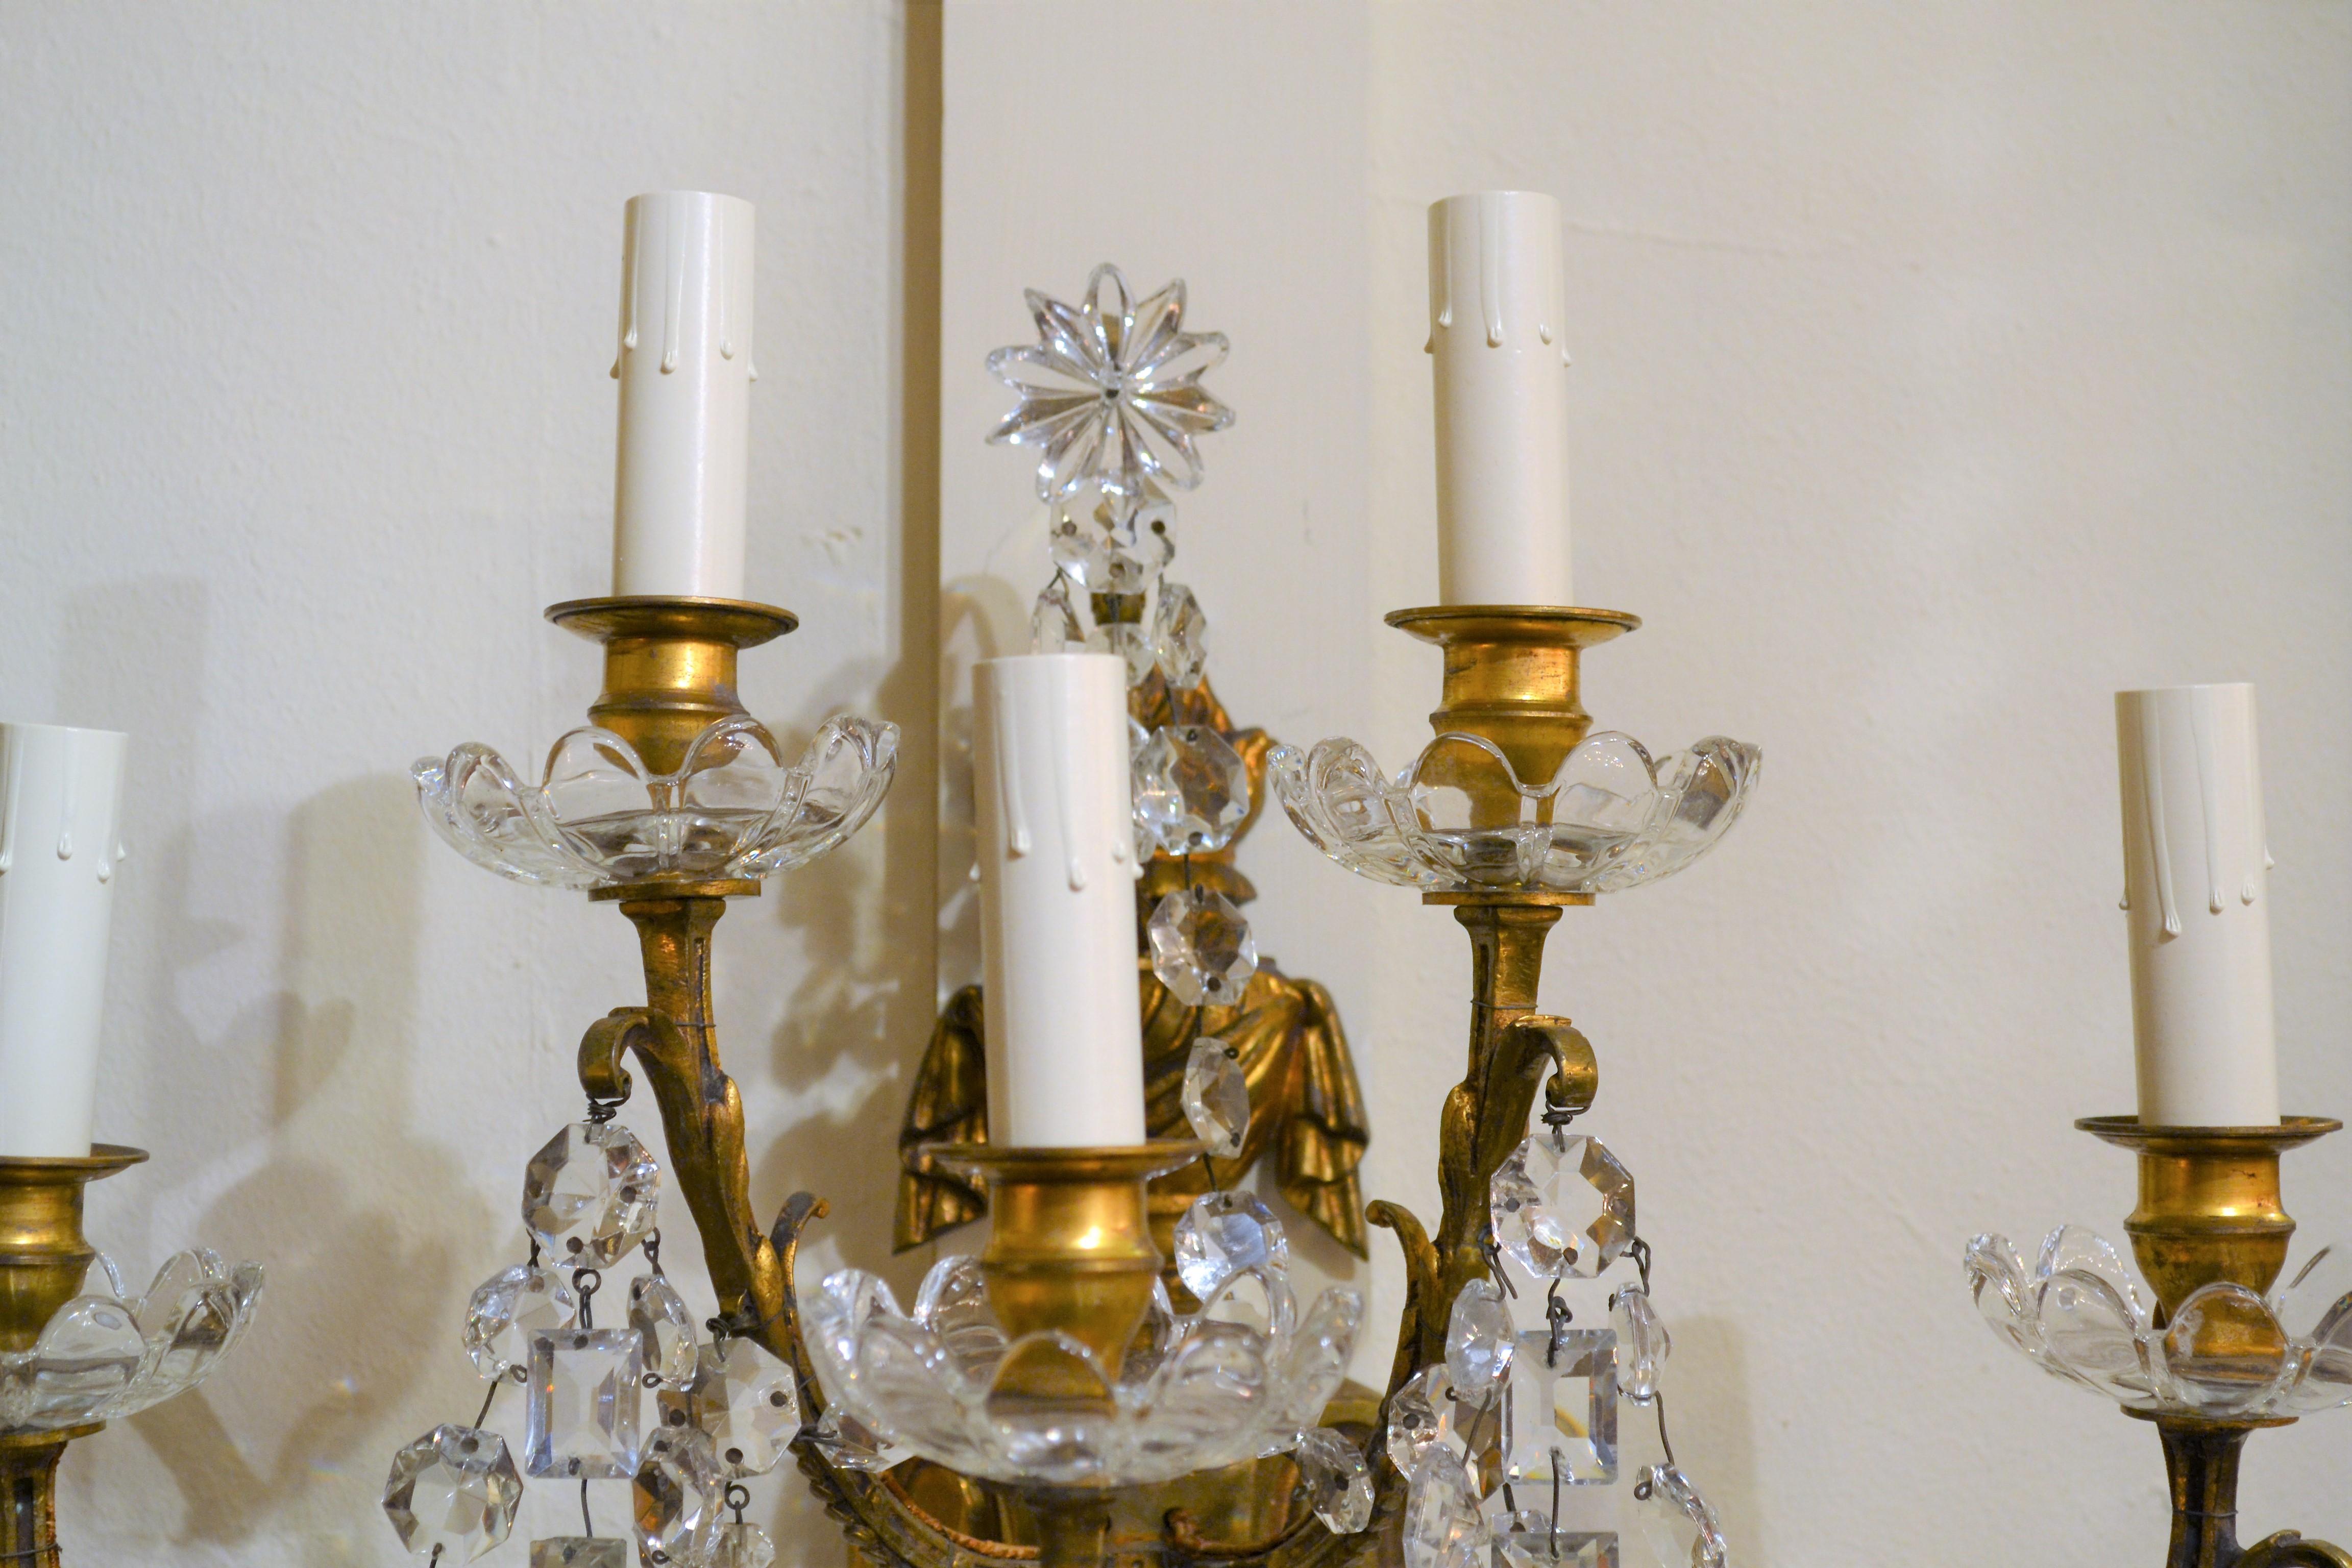 These are beautiful sconces and will lend grace and elegance to any home where they are placed.